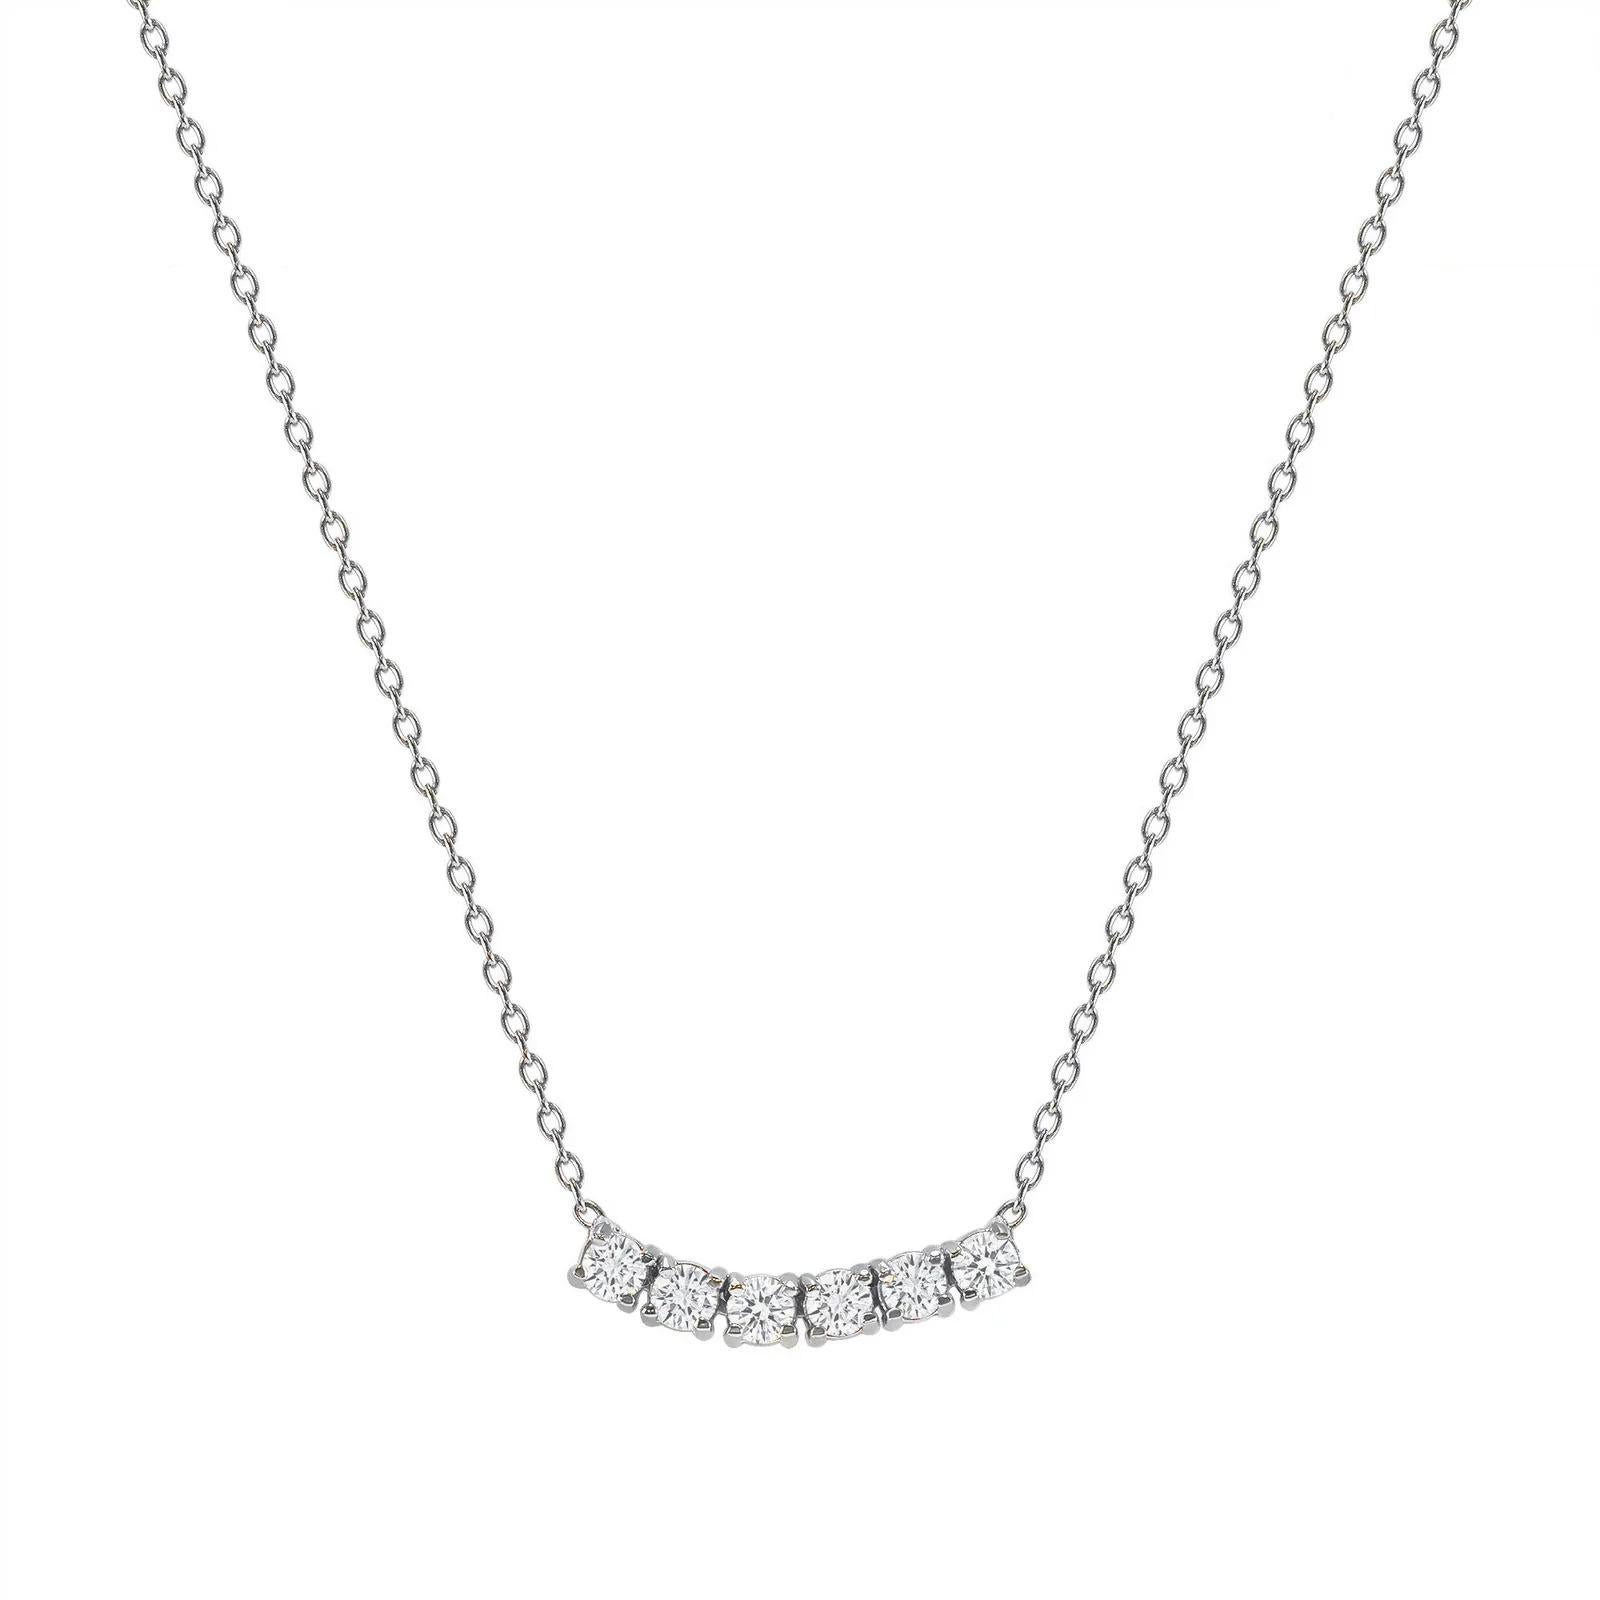 This petite, curved diamond necklace is crafted with gorgeous 14k gold set with six round diamonds.  

Gold: 14k 
Diamond Total Carats: 0.50ct
Diamond Cut: Round (6 diamonds)
Diamond Clarity: VS
Diamond Color: F
Color: White Gold
Necklace Length: 22